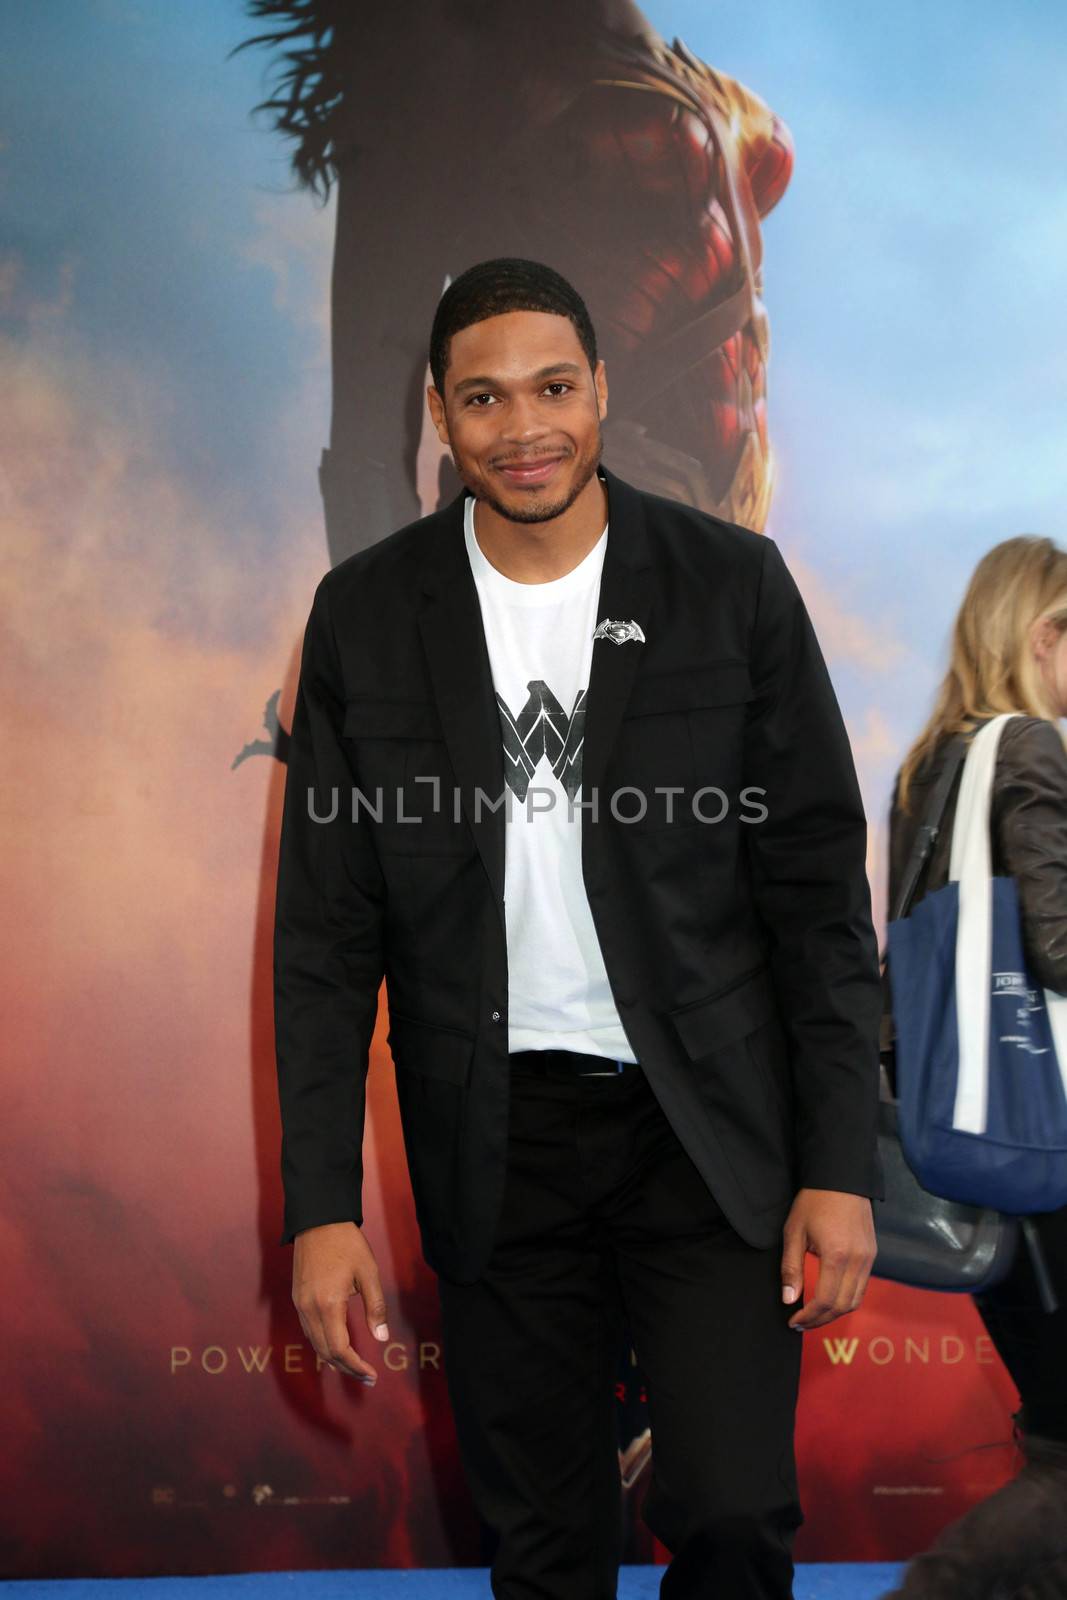 Ray Fisher
at the "Wonder Woman" Premiere, Pantages, Hollywood, CA 05-25-17/ImageCollect by ImageCollect